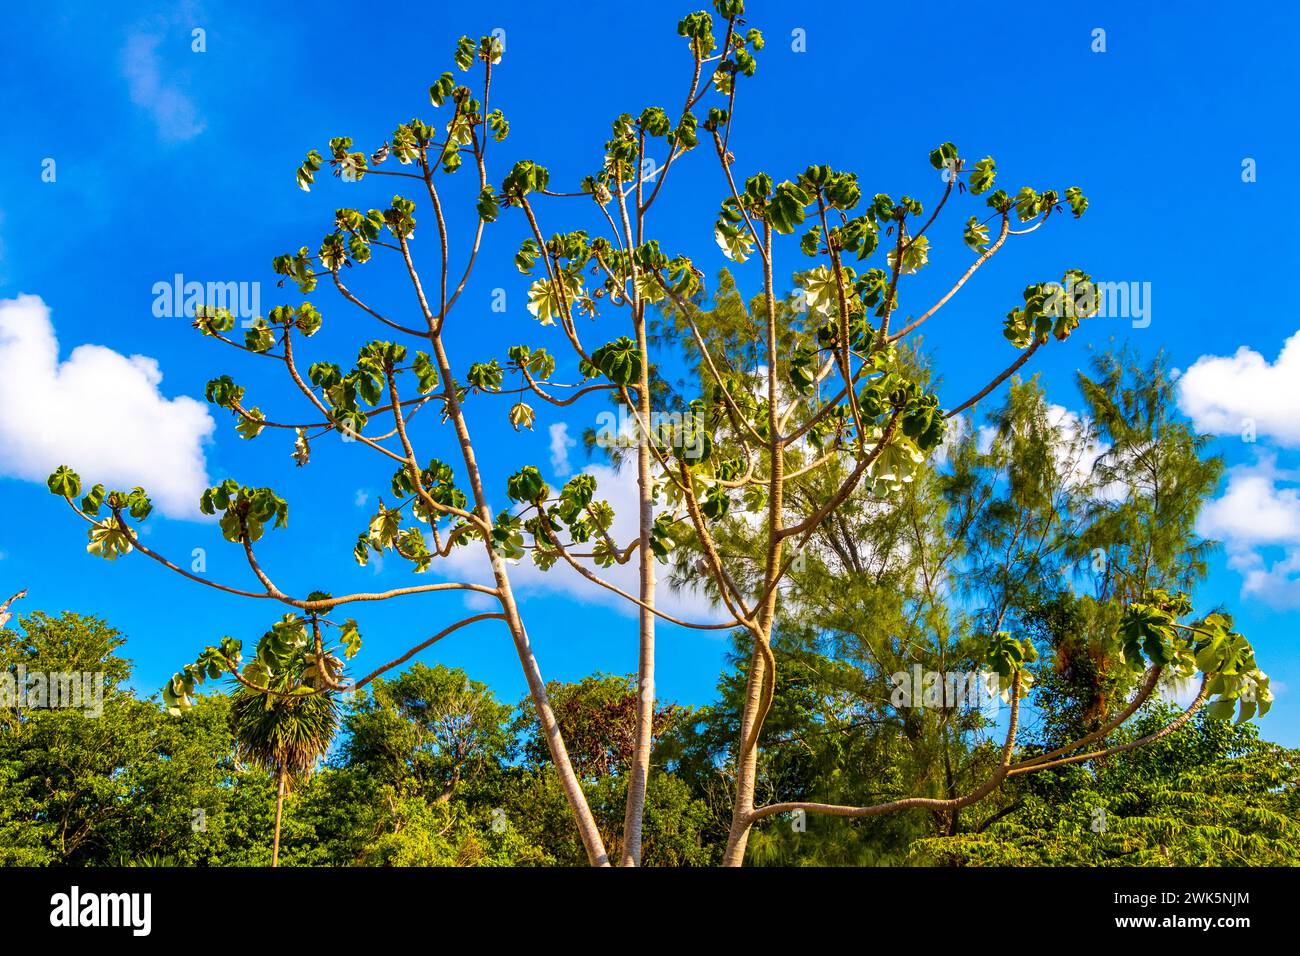 Cecropia Yagrumo trumpet tree in tropical jungle nature with blue sky background in Playa del Carmen Quintana Roo Mexico. Stock Photo